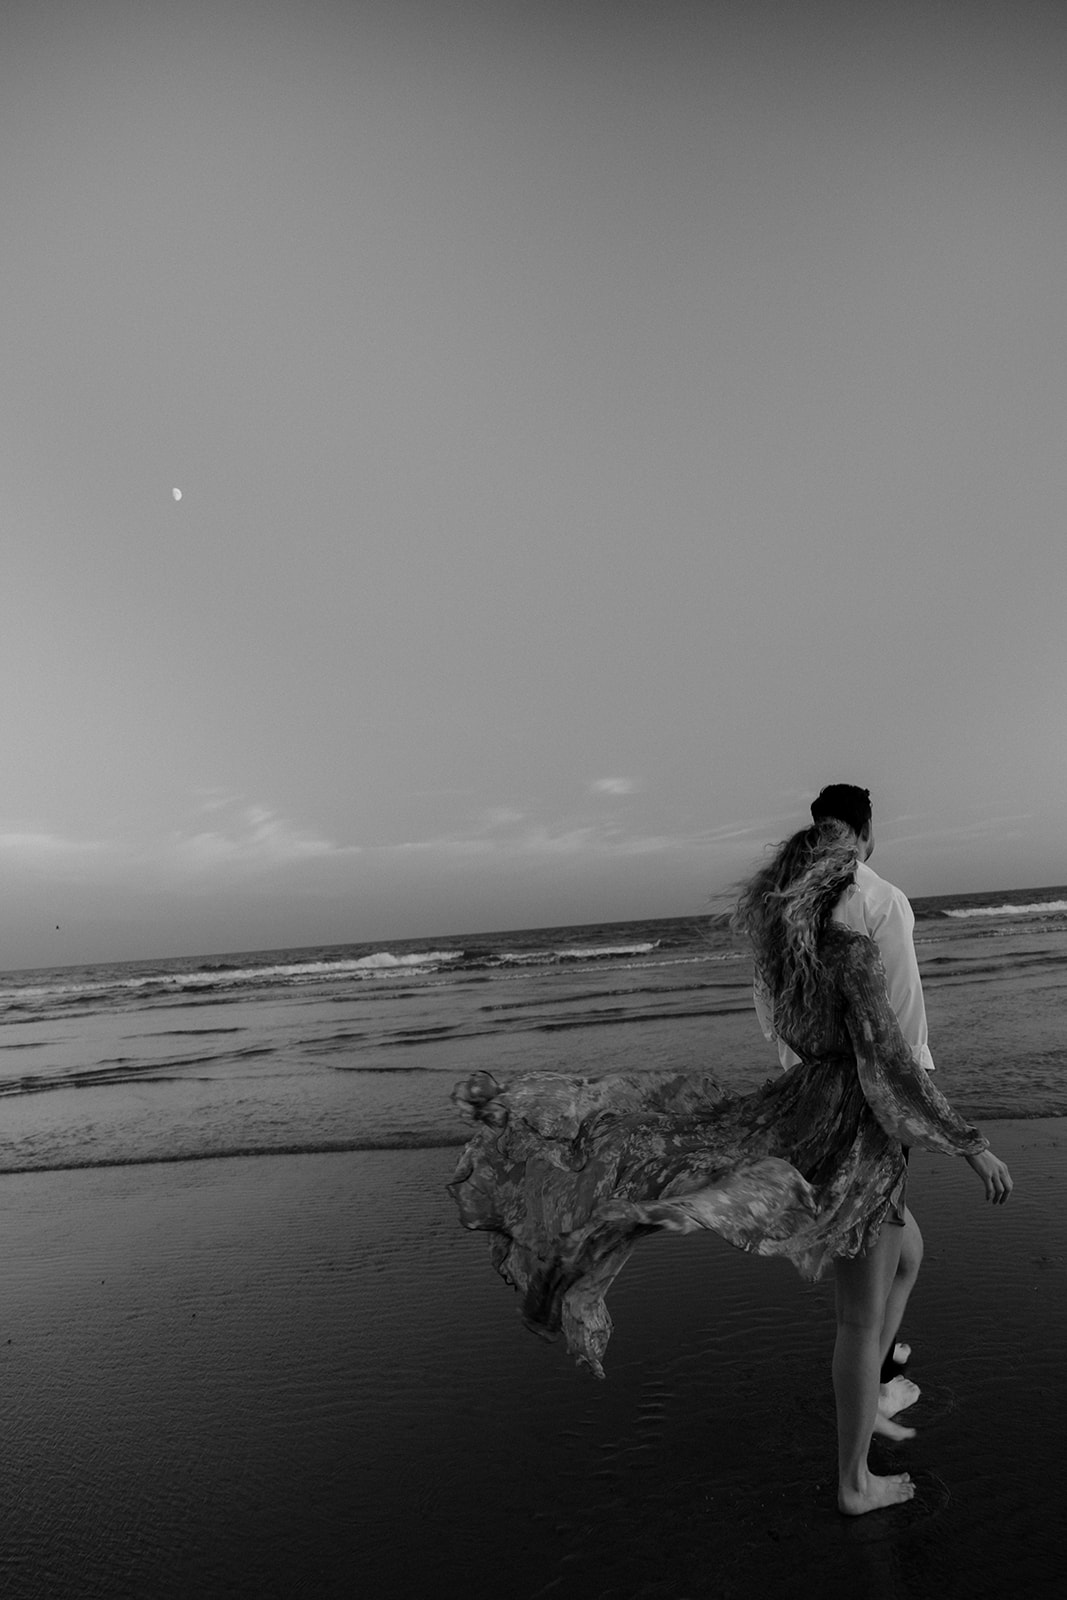 Wind blows dress at Charleston Beach Engagement Photo in black and white. Couple walking close to water